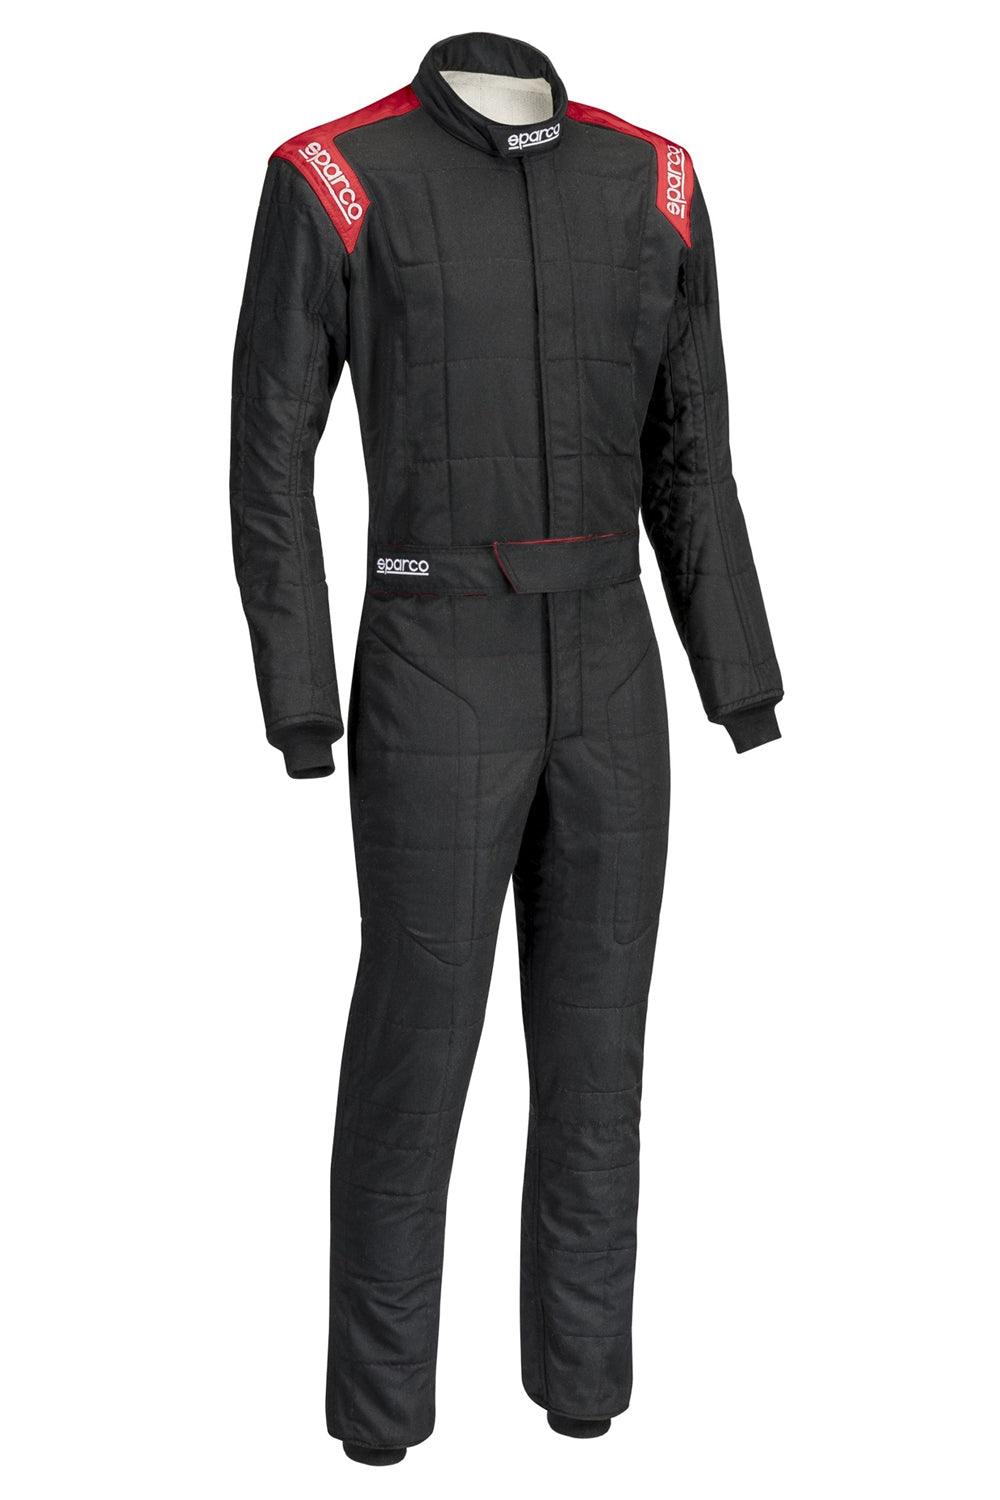 Suit Conquest Blk/ Red Small / Medium - Burlile Performance Products